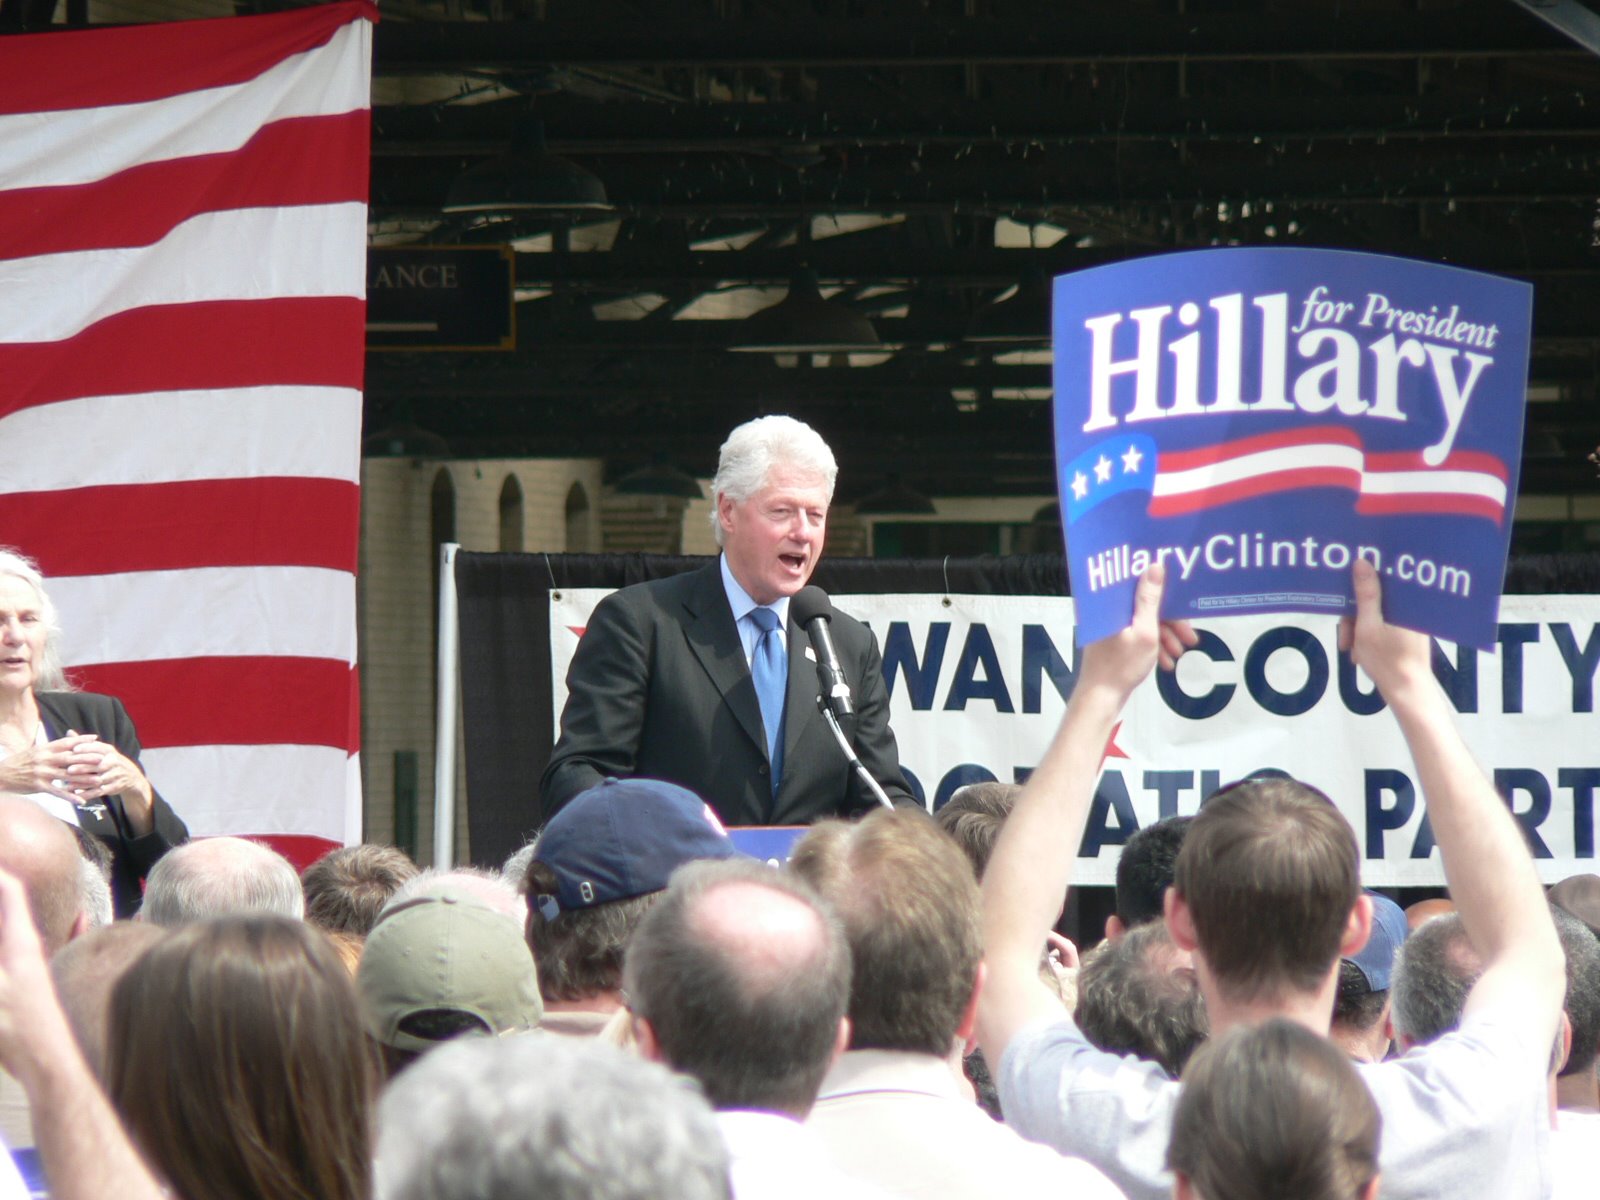 [P1000499+-+Bill+Clinton+with+support+holdig+Hillary+sign.JPG]